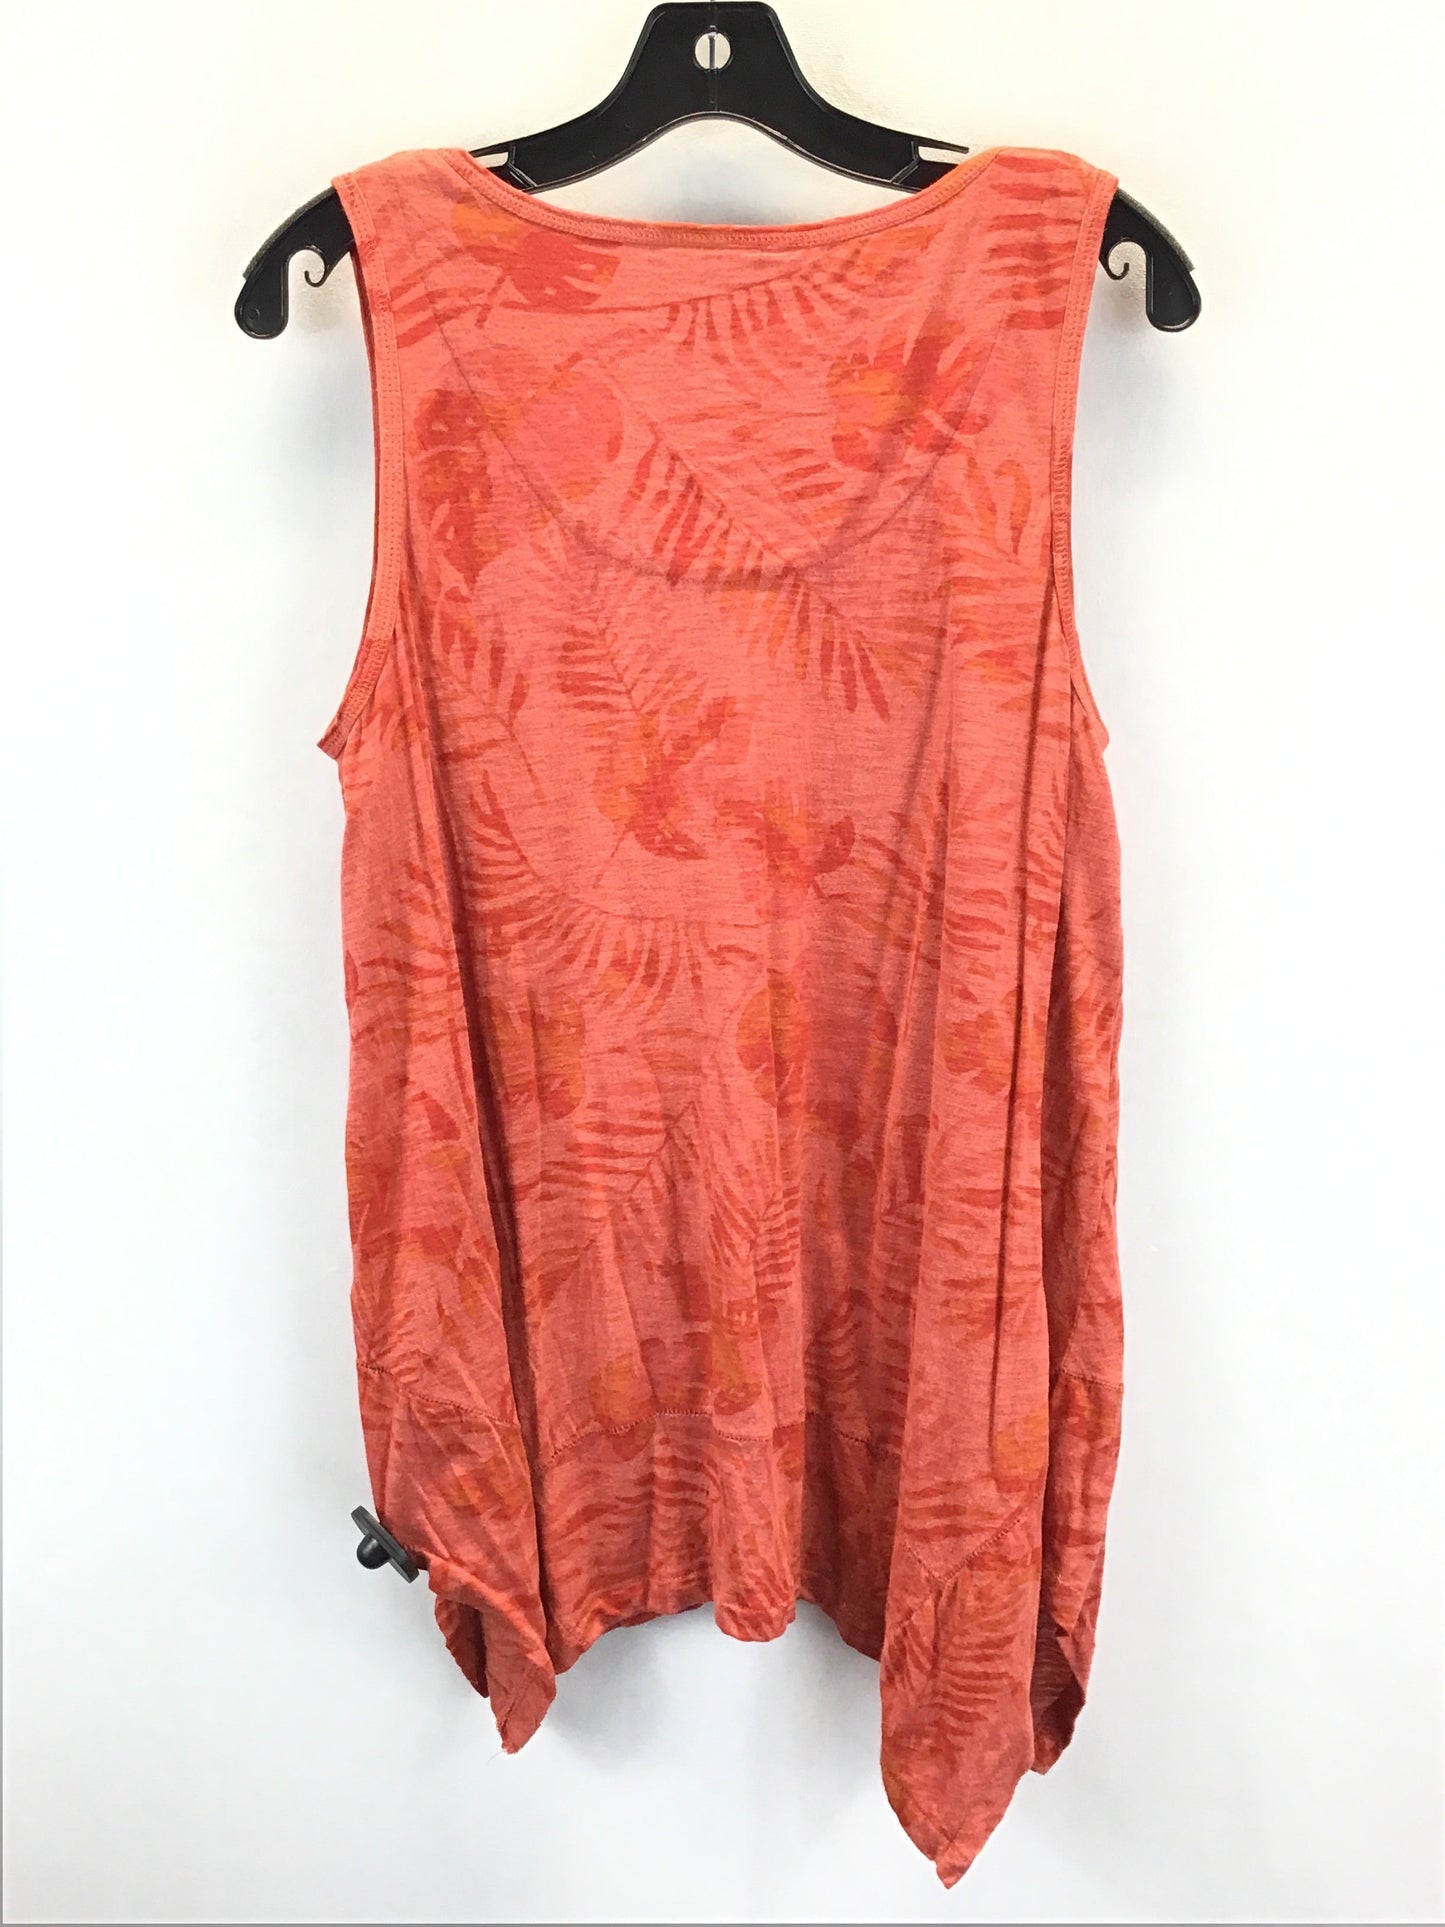 Top Sleeveless By Style And Company  Size: M